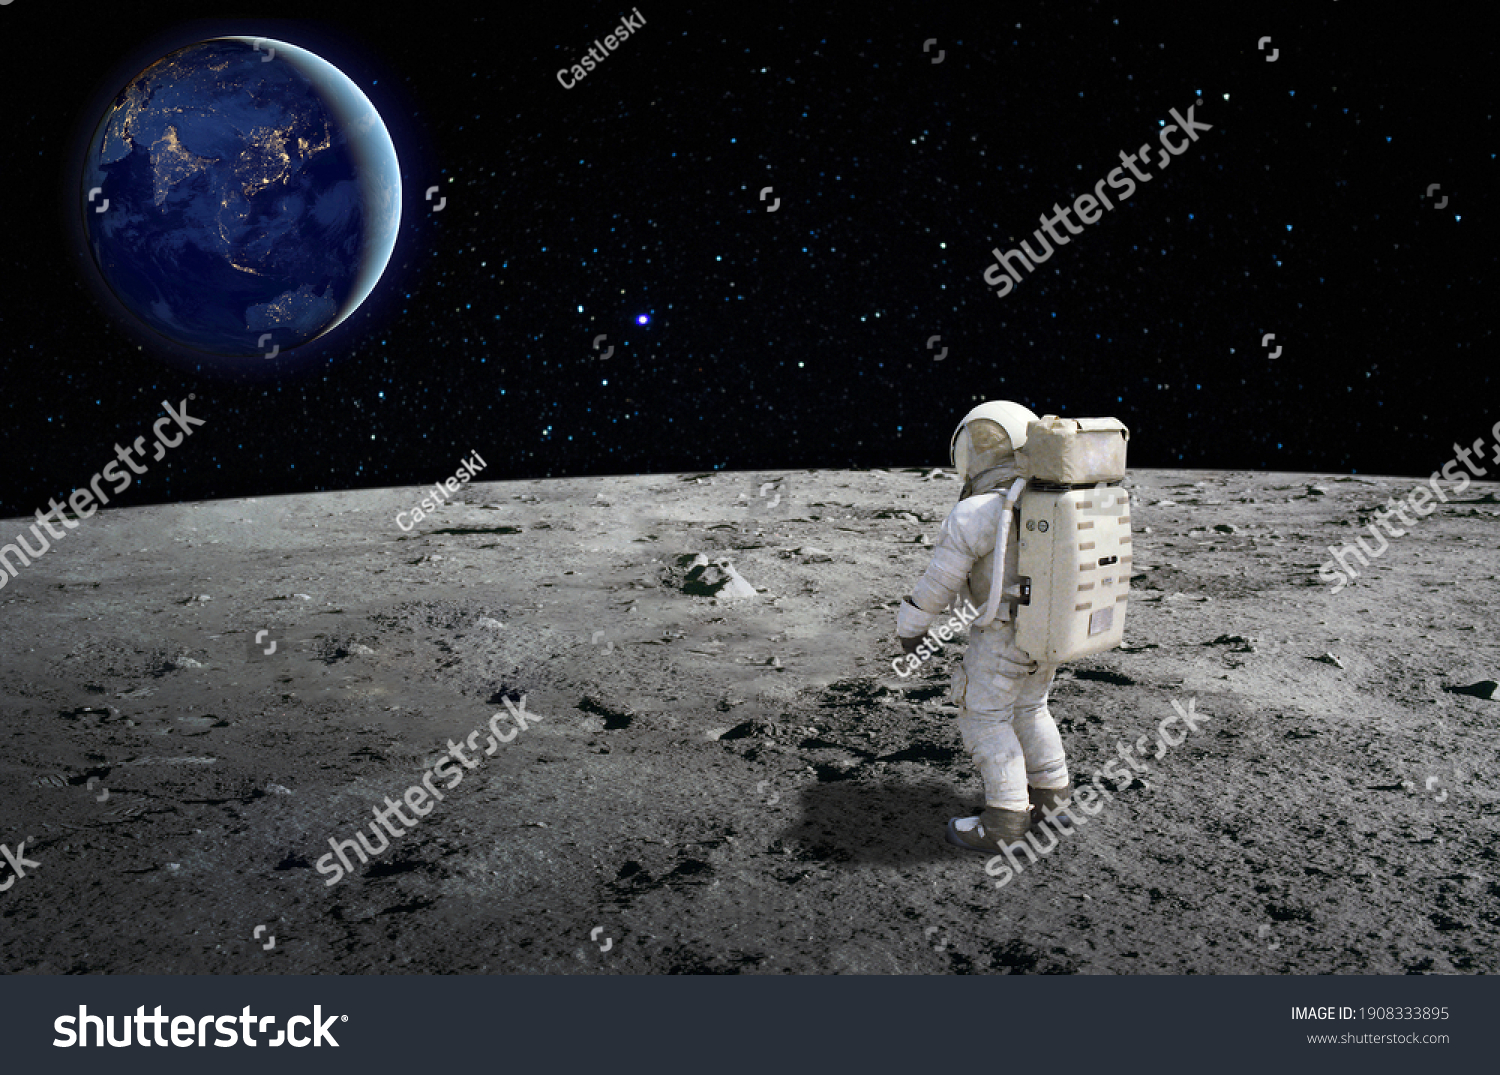 An astronaut standing on the surface of the moon looking up to the earth on the background. Elements of this image furnished by NASA. #1908333895